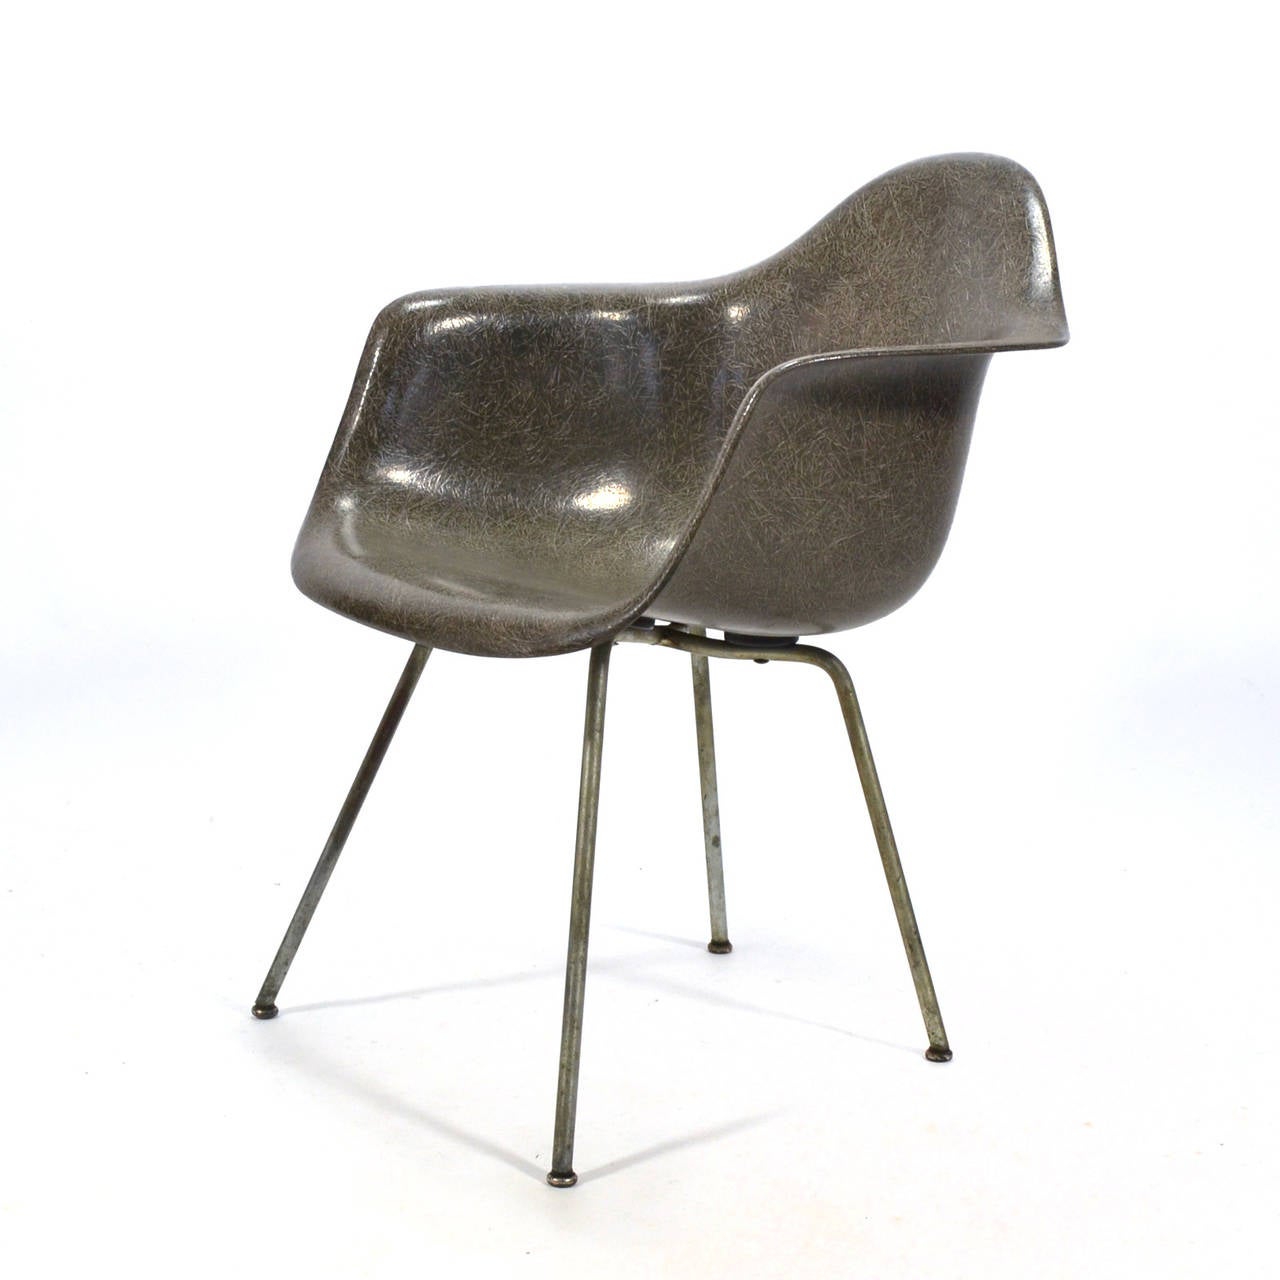 The earliest fiberglass Eames chairs were produced by Zenith Plastics and came in a limited palate including elephant hide gray. The Zenith produced shells are distinctive for their high fiber content and larger, more substantial rubber shock